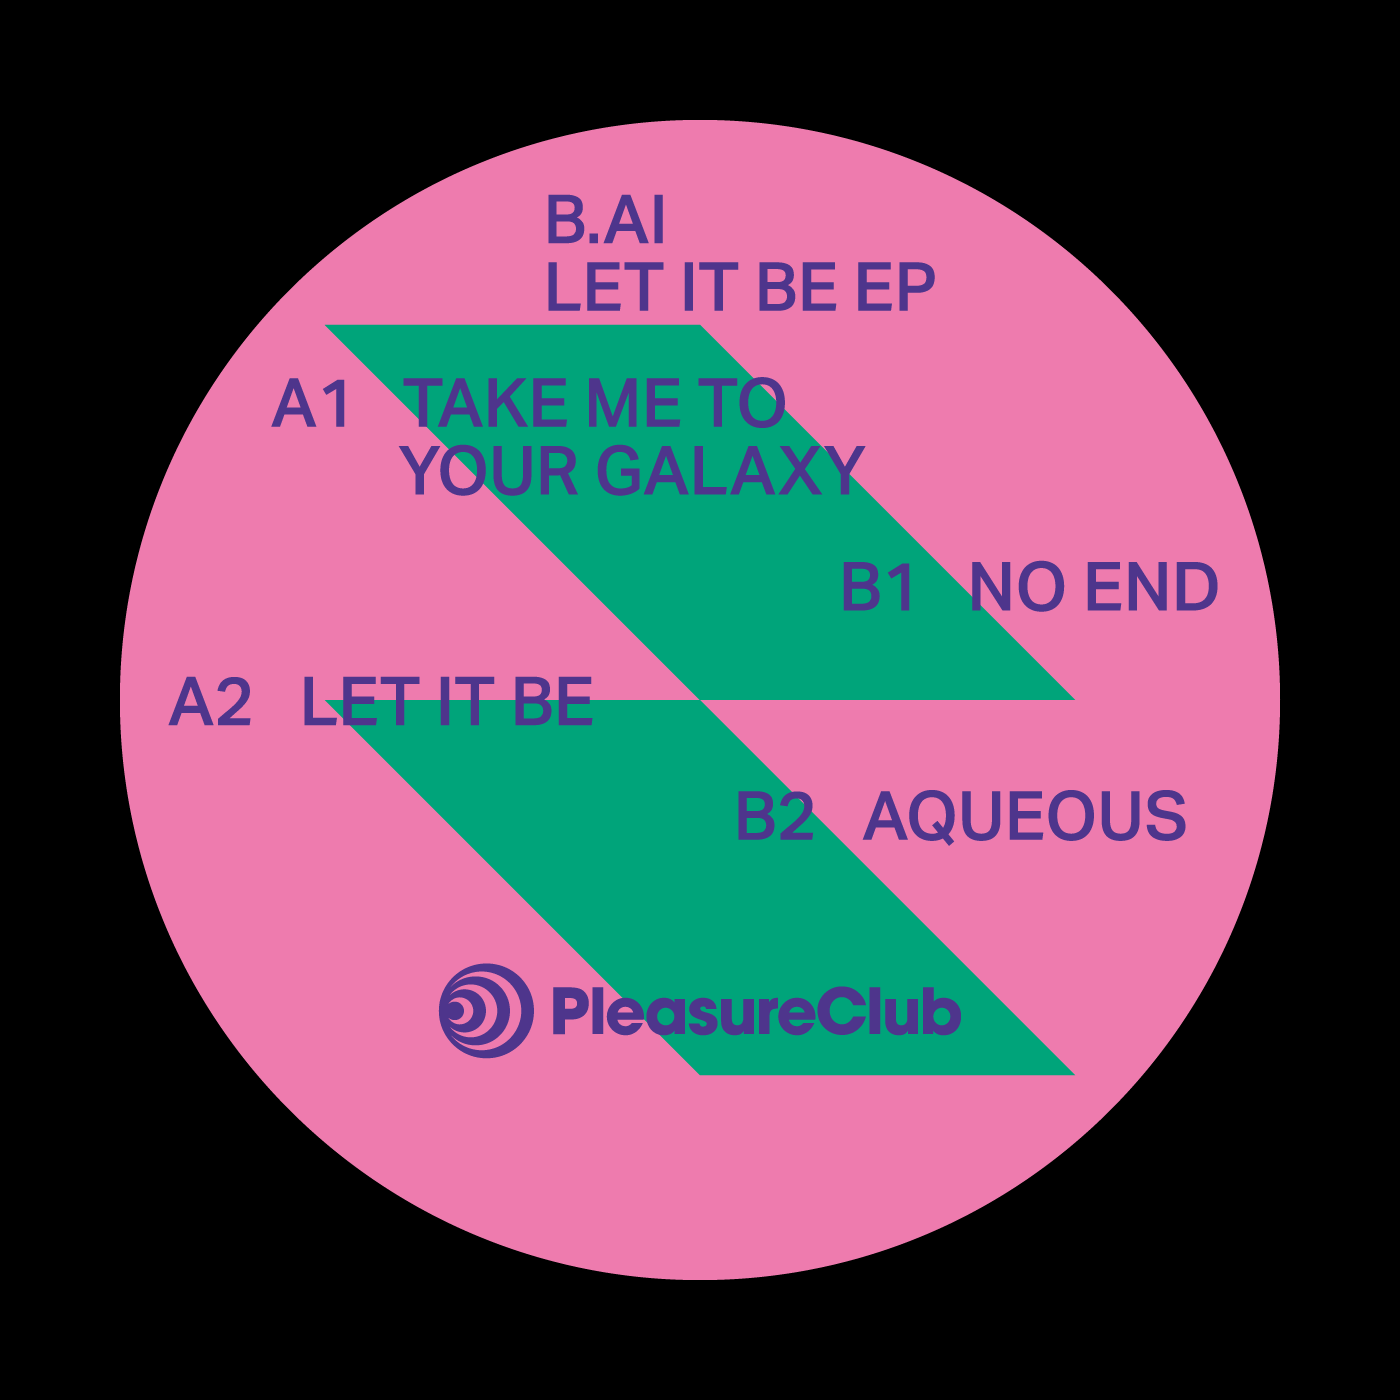 LET IT BE EP